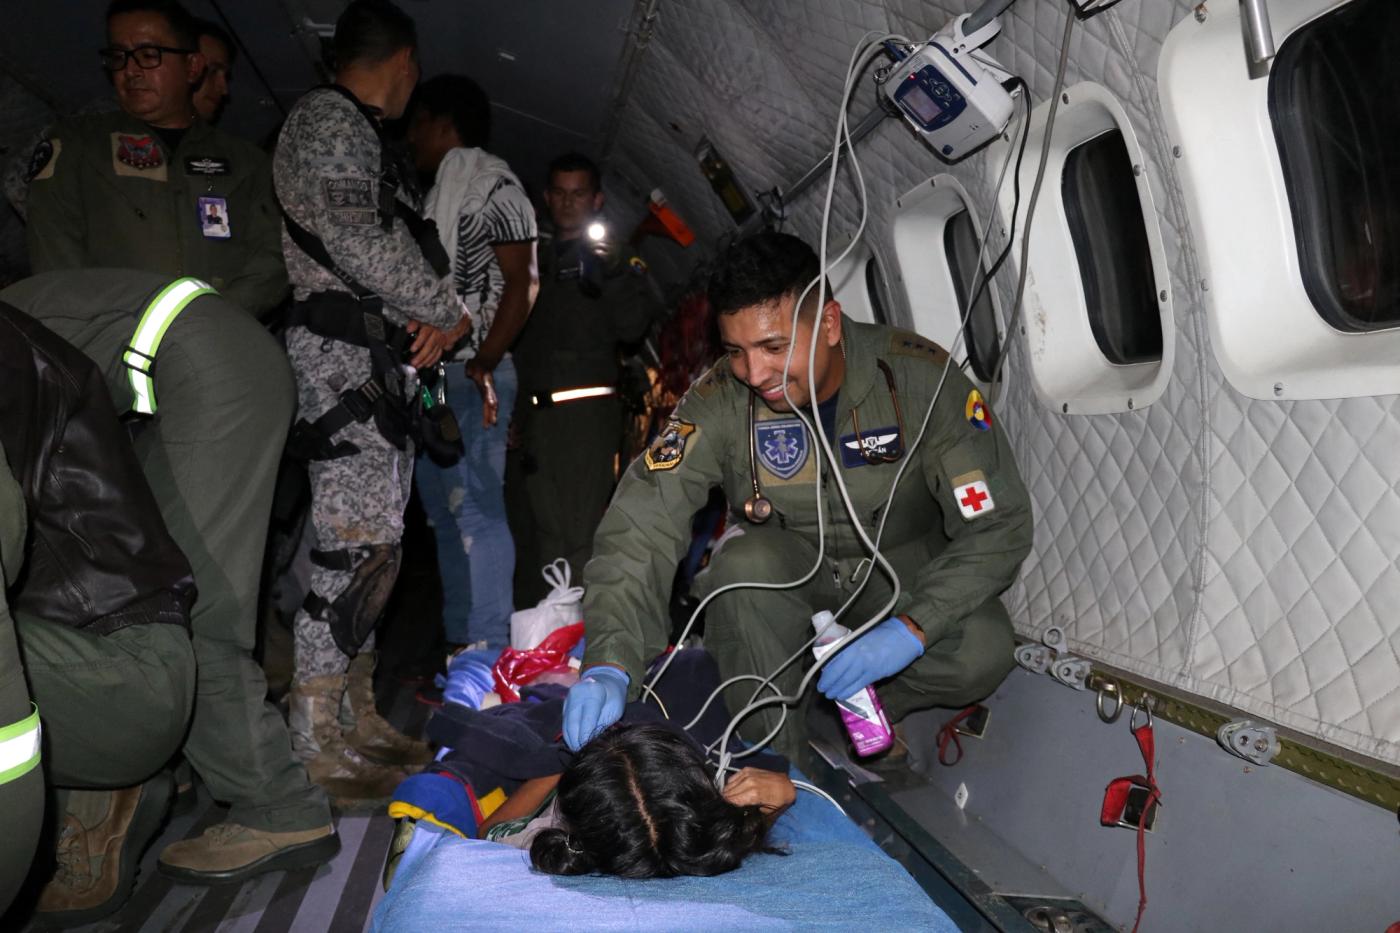 Soldiers of the Colombian Air Force agive medical attention inside a plane to the surviving children of a plane crash in the thick jungle.